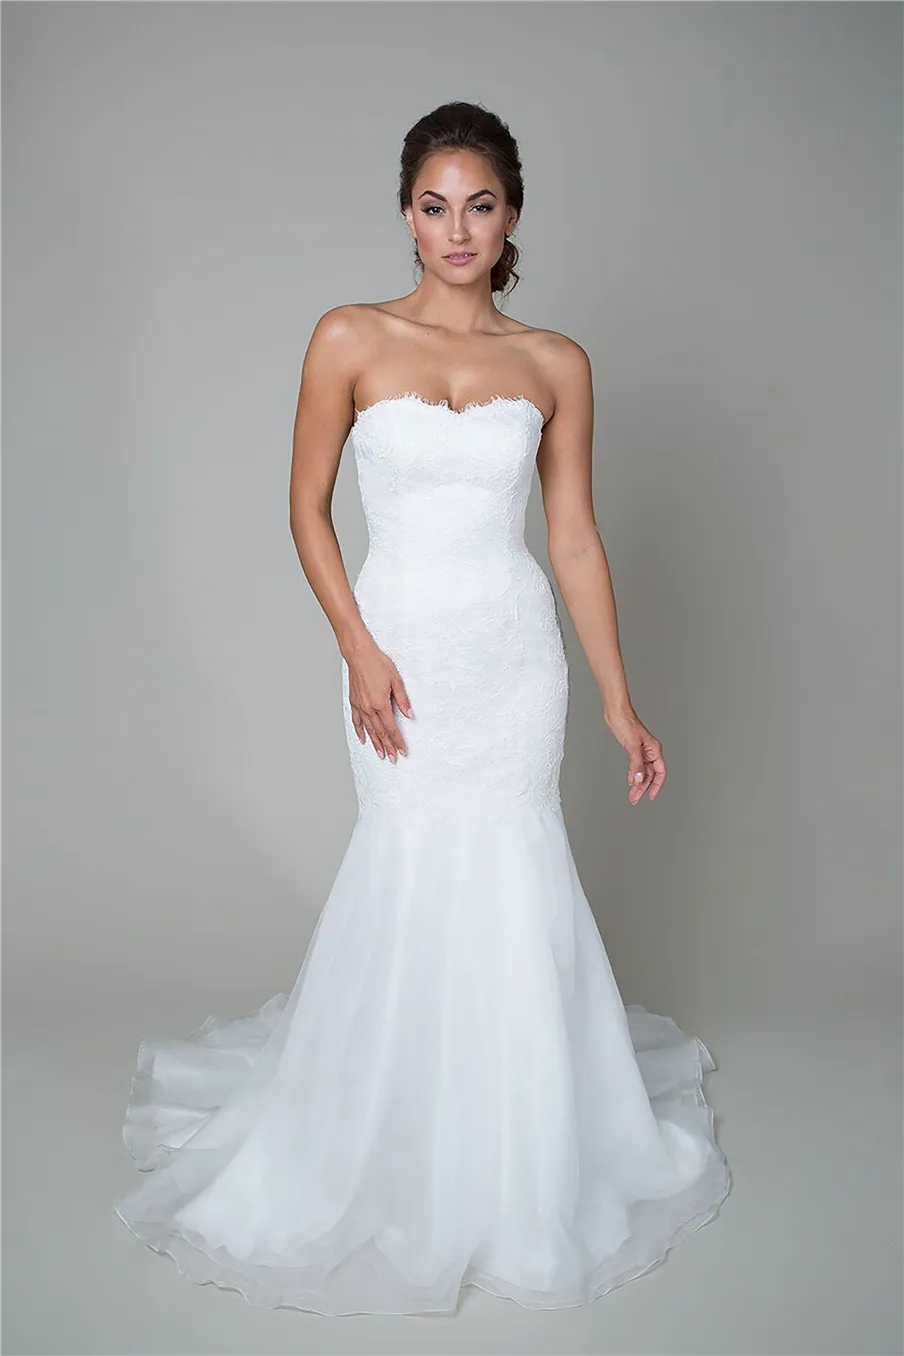 Trumpet Style Wedding Gown Features a Dropped Waist a Sweetheart Neckline a Flowing Organza Skirt And Corded Lace Bridal Dress